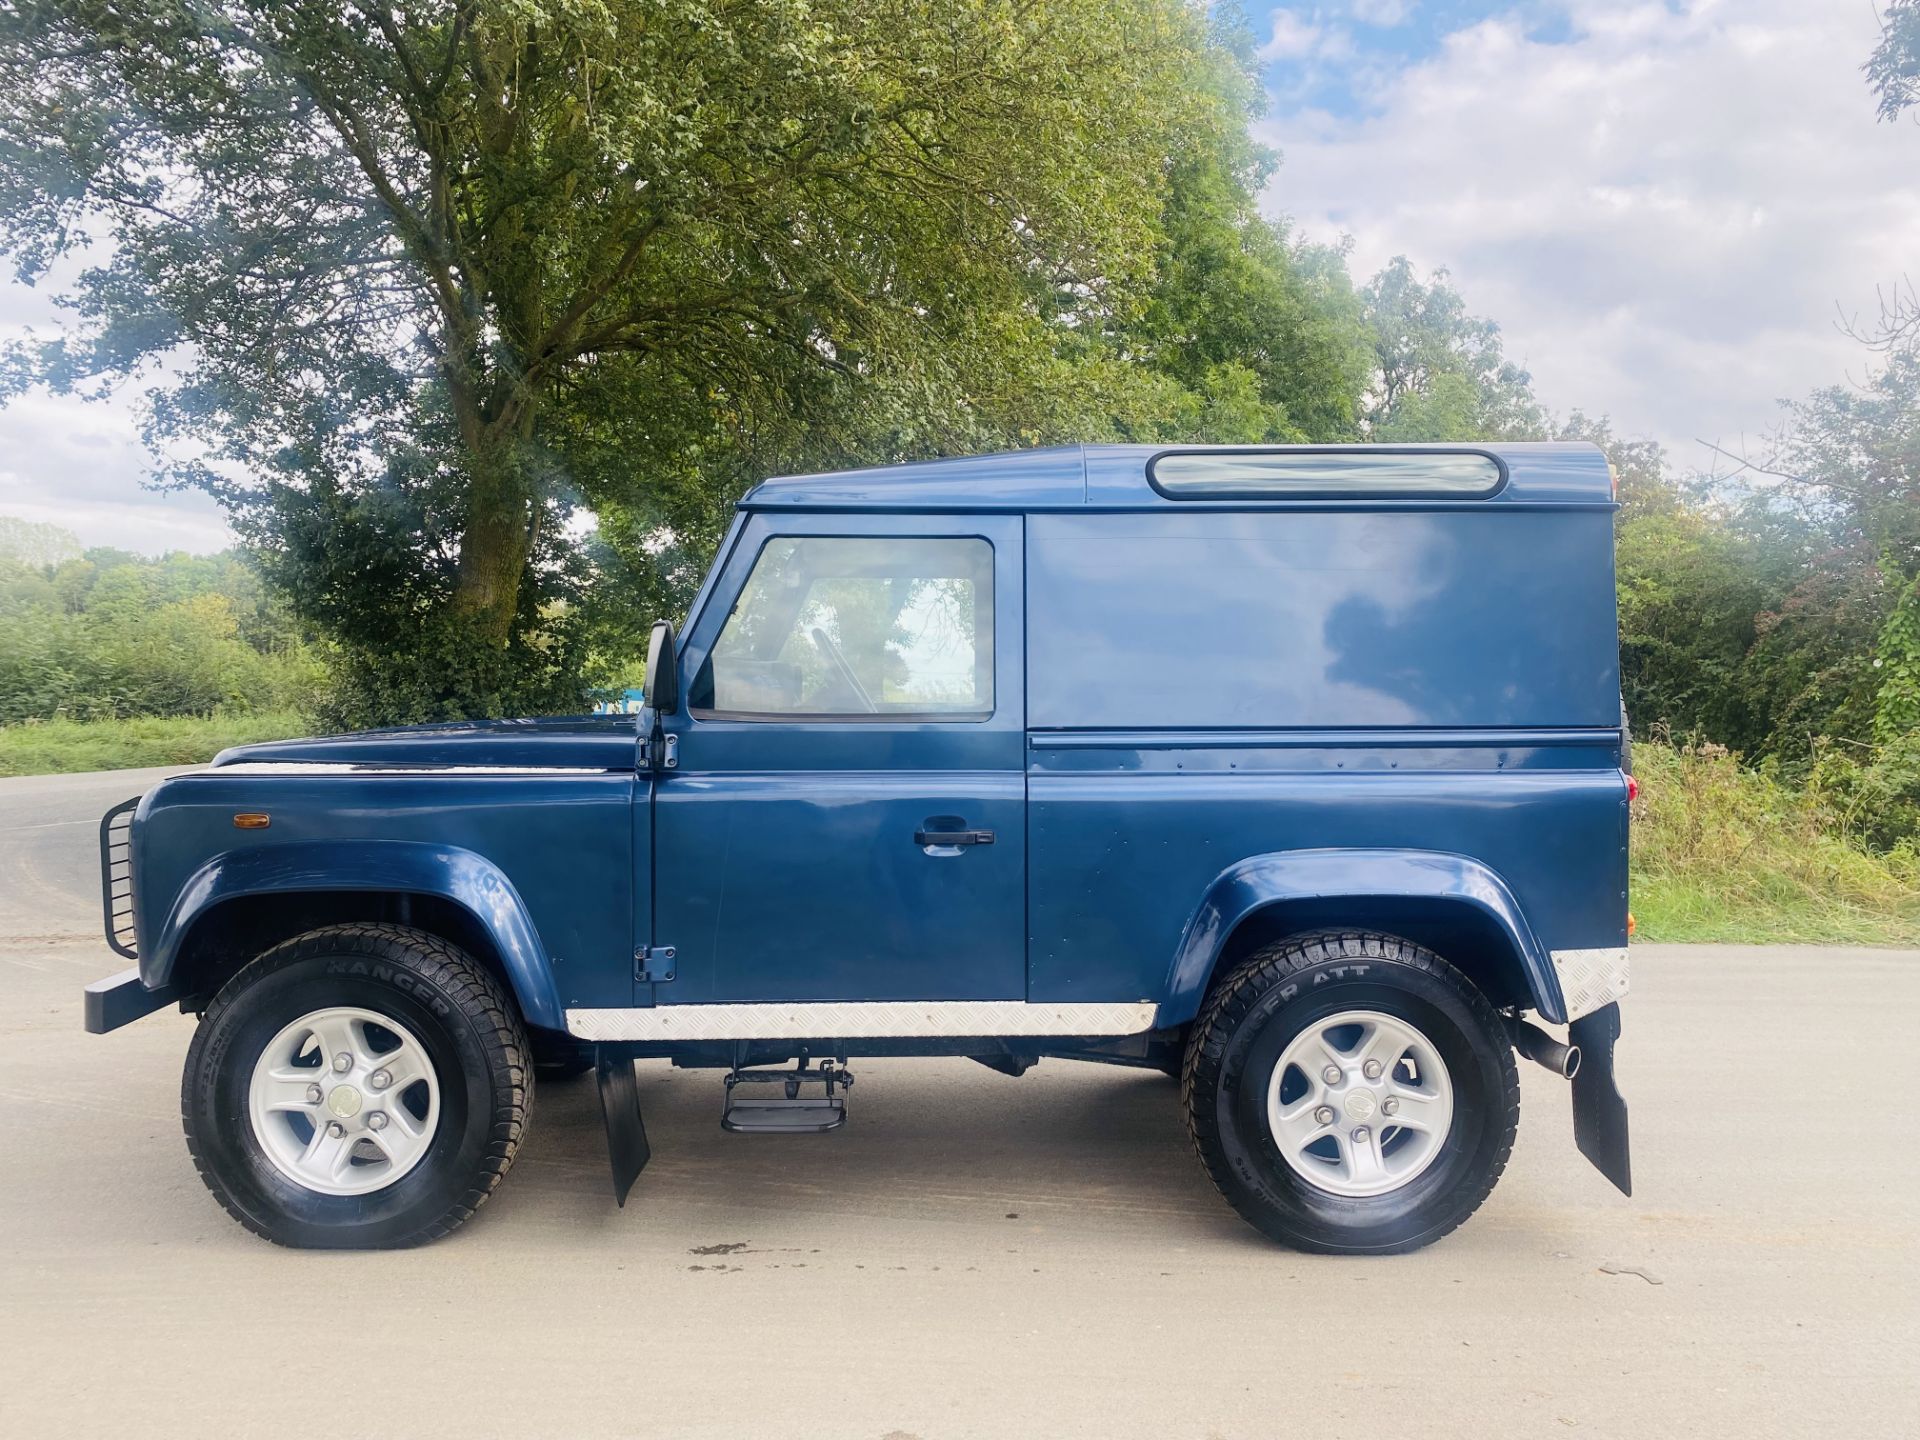 LANDROVER DEFENDER 90 "COUNTY"HARD TOP "TD5" 2.5 (06 REG) ONLY 78K MILES WITH HISTORY (NO VAT) - Image 8 of 25